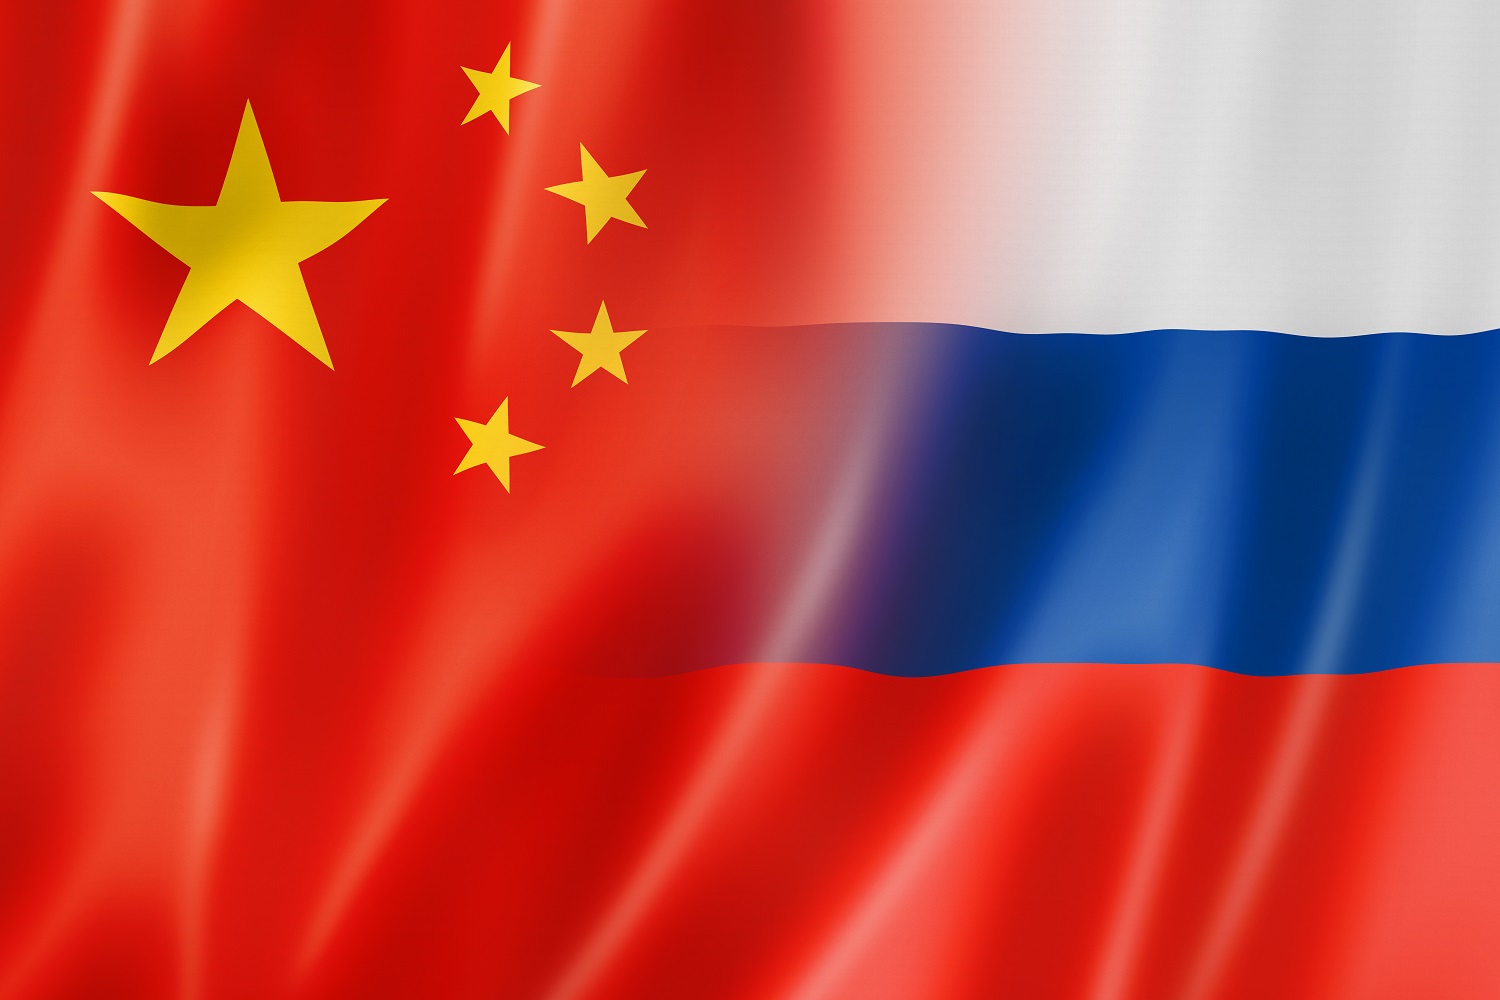 The flags of China and Russia blend into one another.